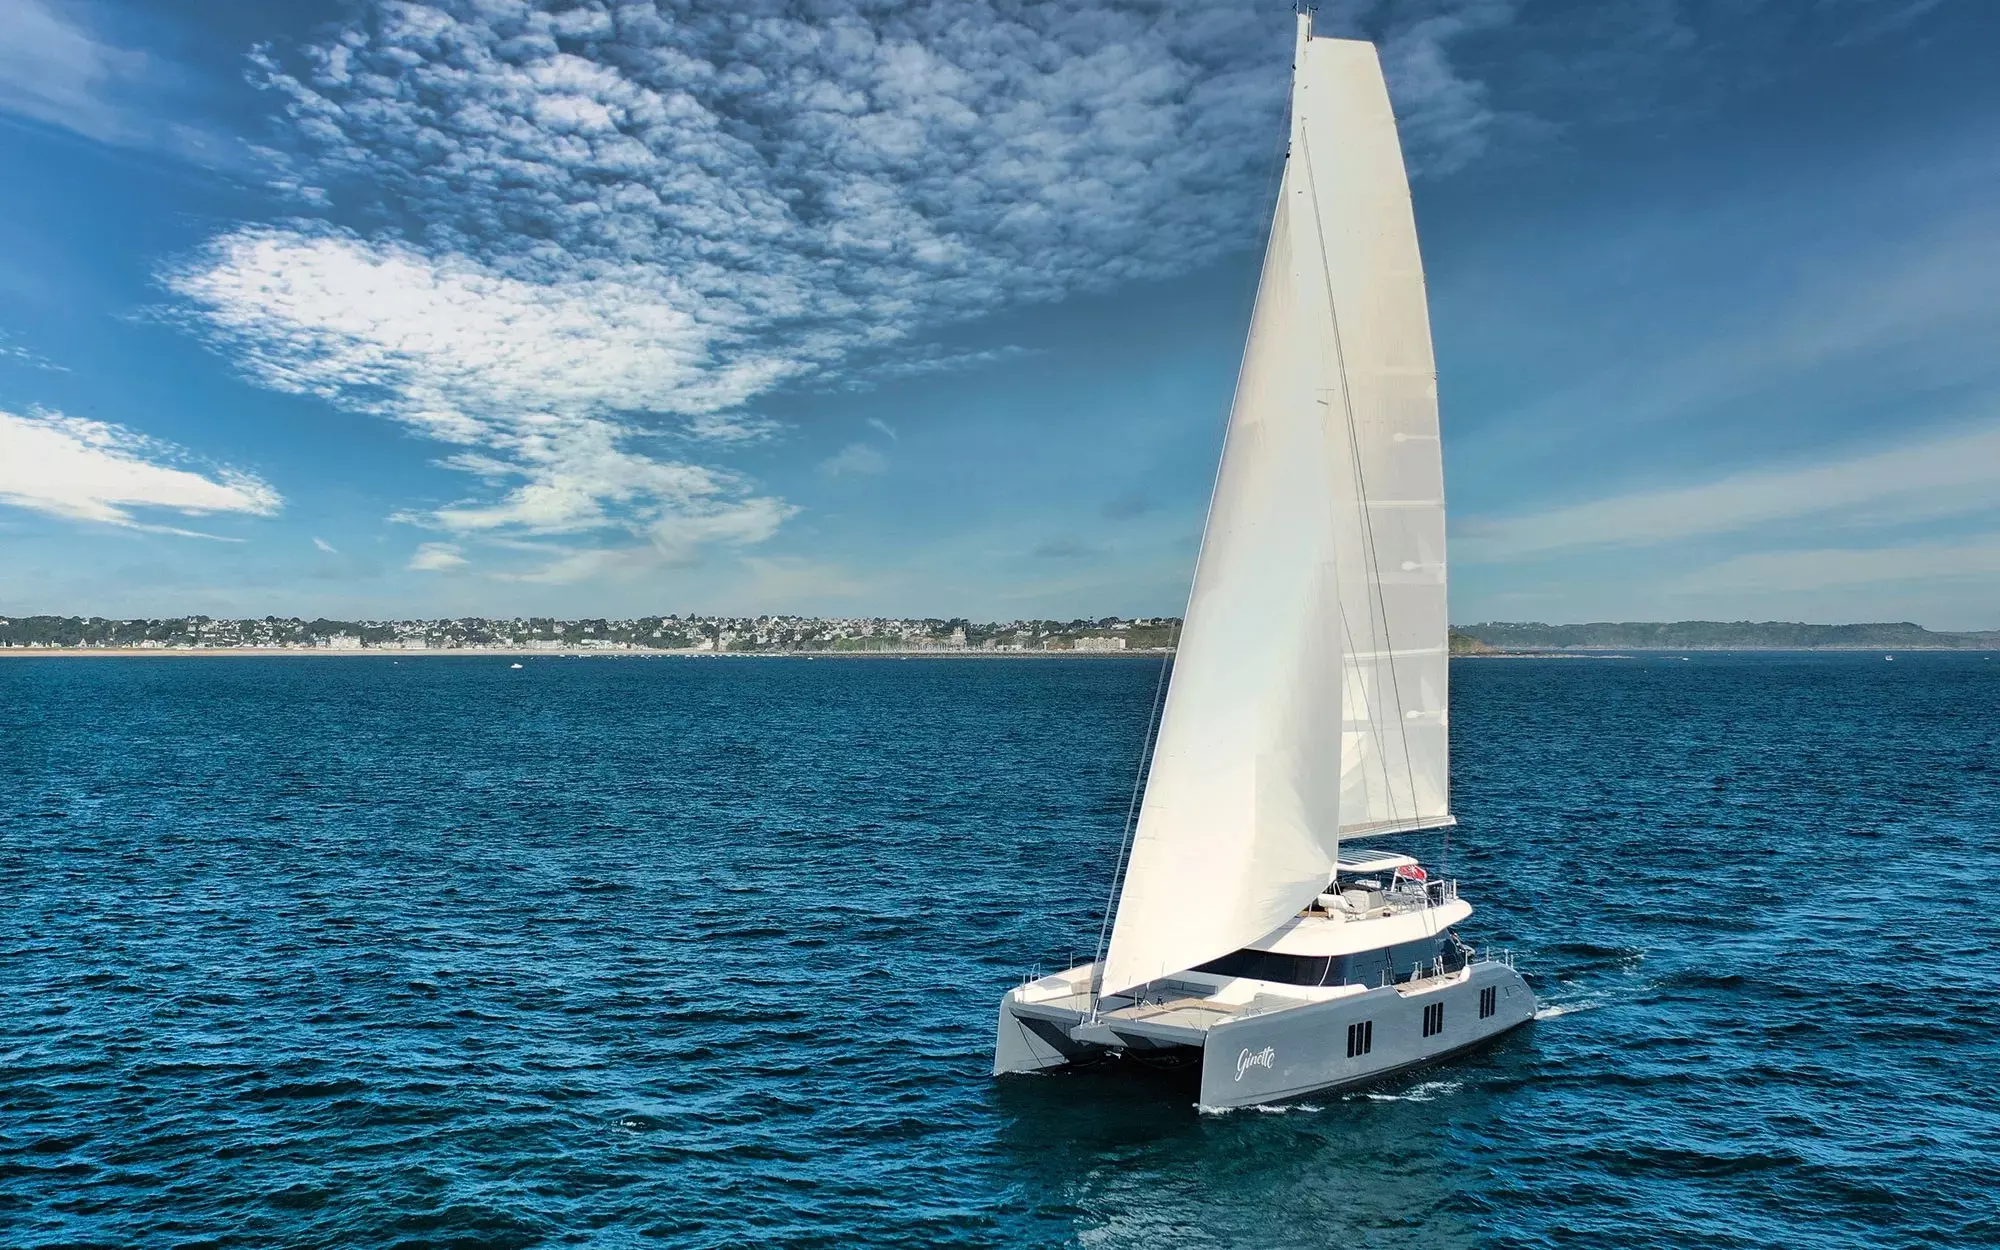 Ginette by Sunreef Yachts - Special Offer for a private Luxury Catamaran Charter in Cairns with a crew